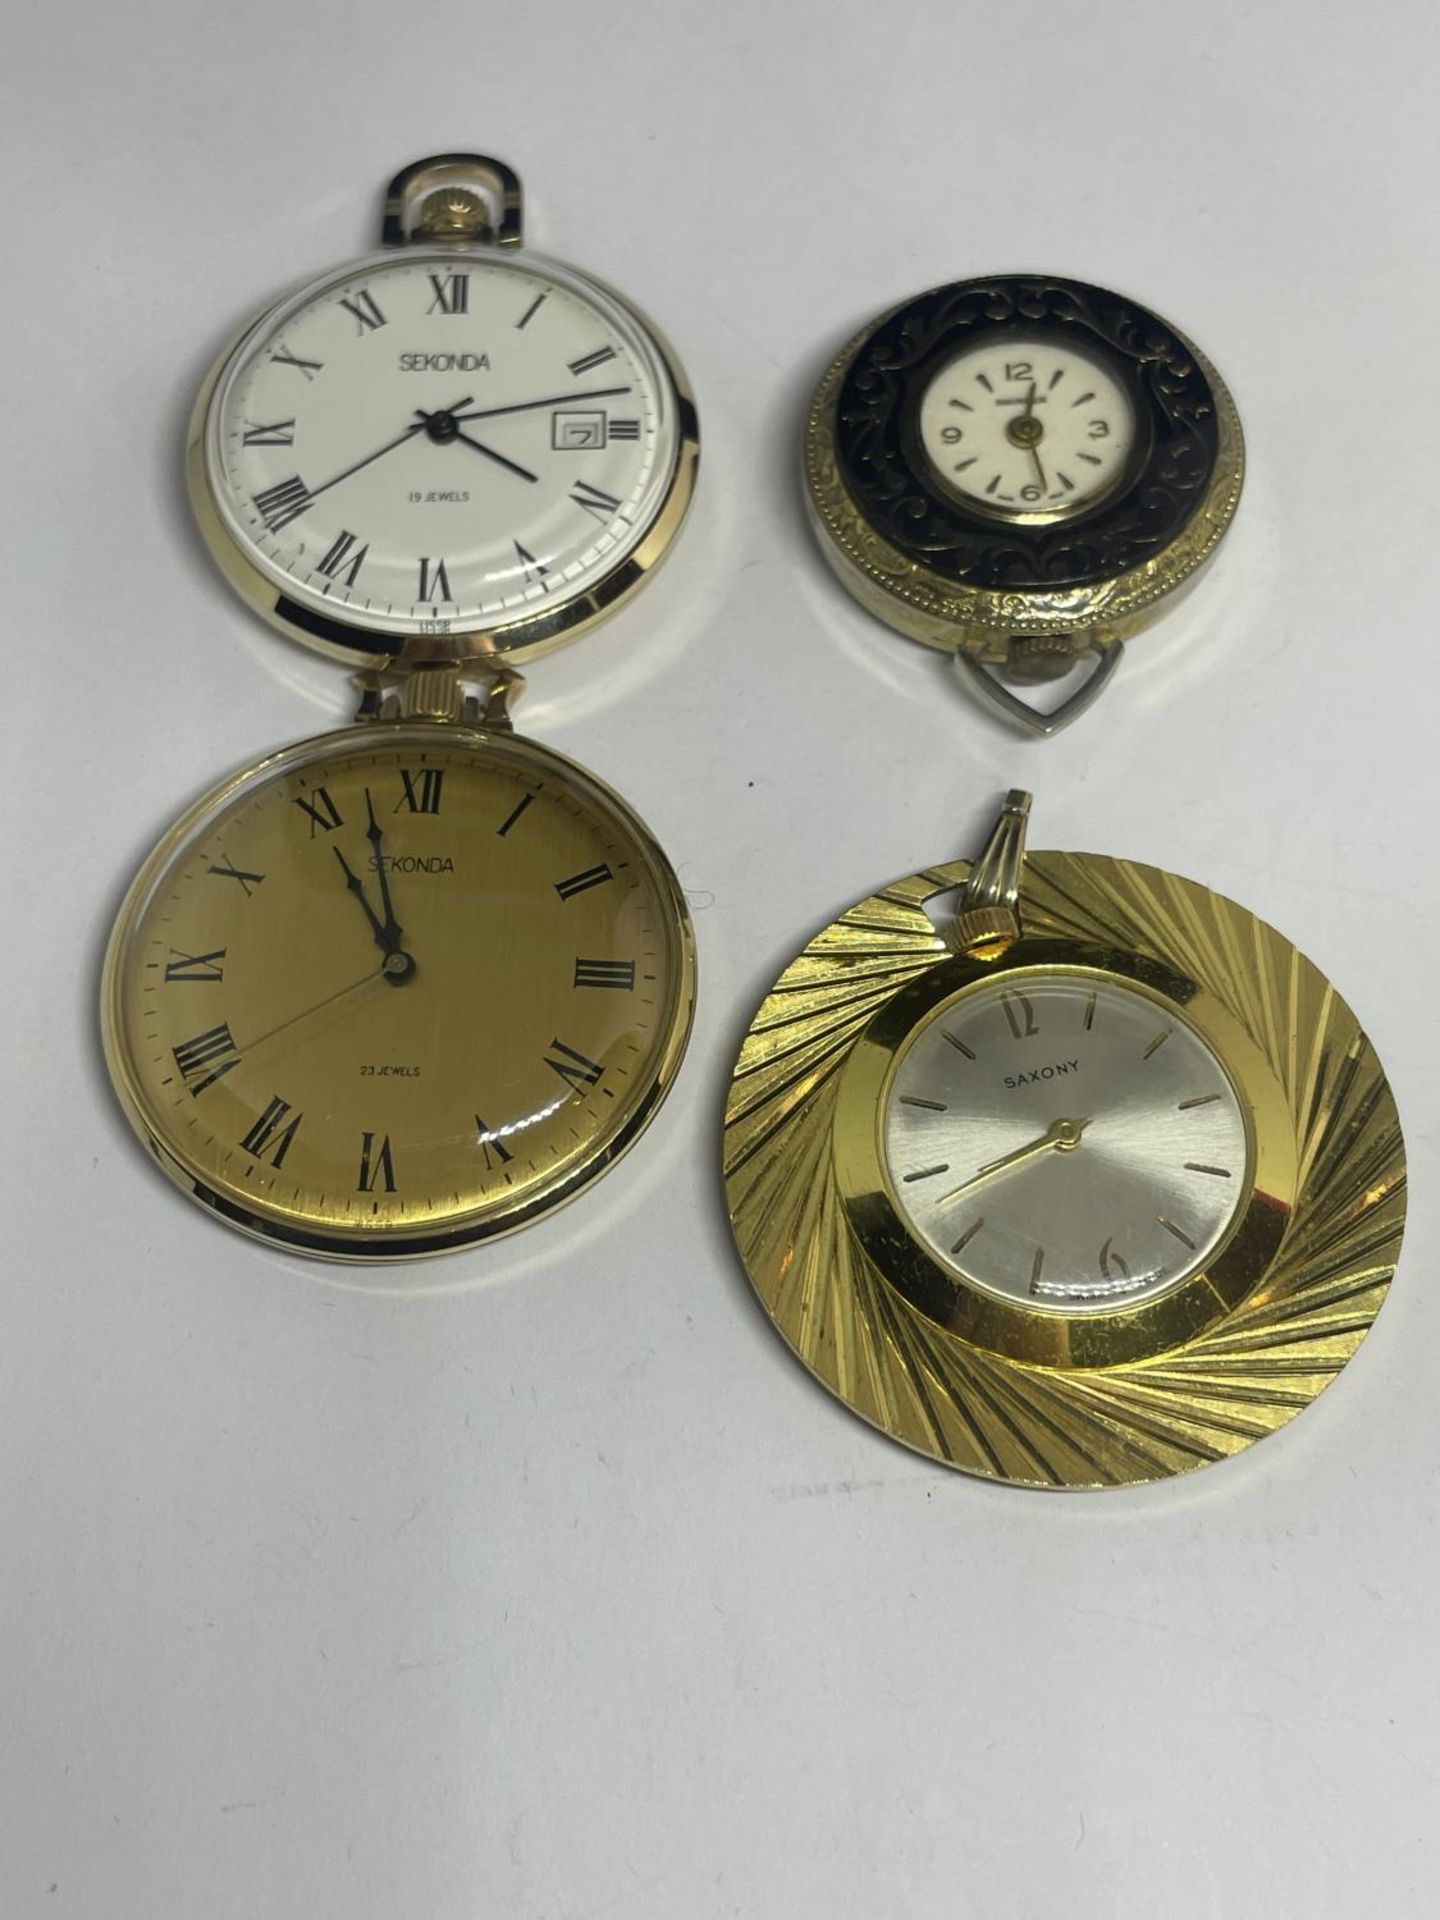 FOUR VARIOUS POCKET AND PENDANT WATCHES TWO SEKONDA SEEN WORKING BUT NO WARRANTY